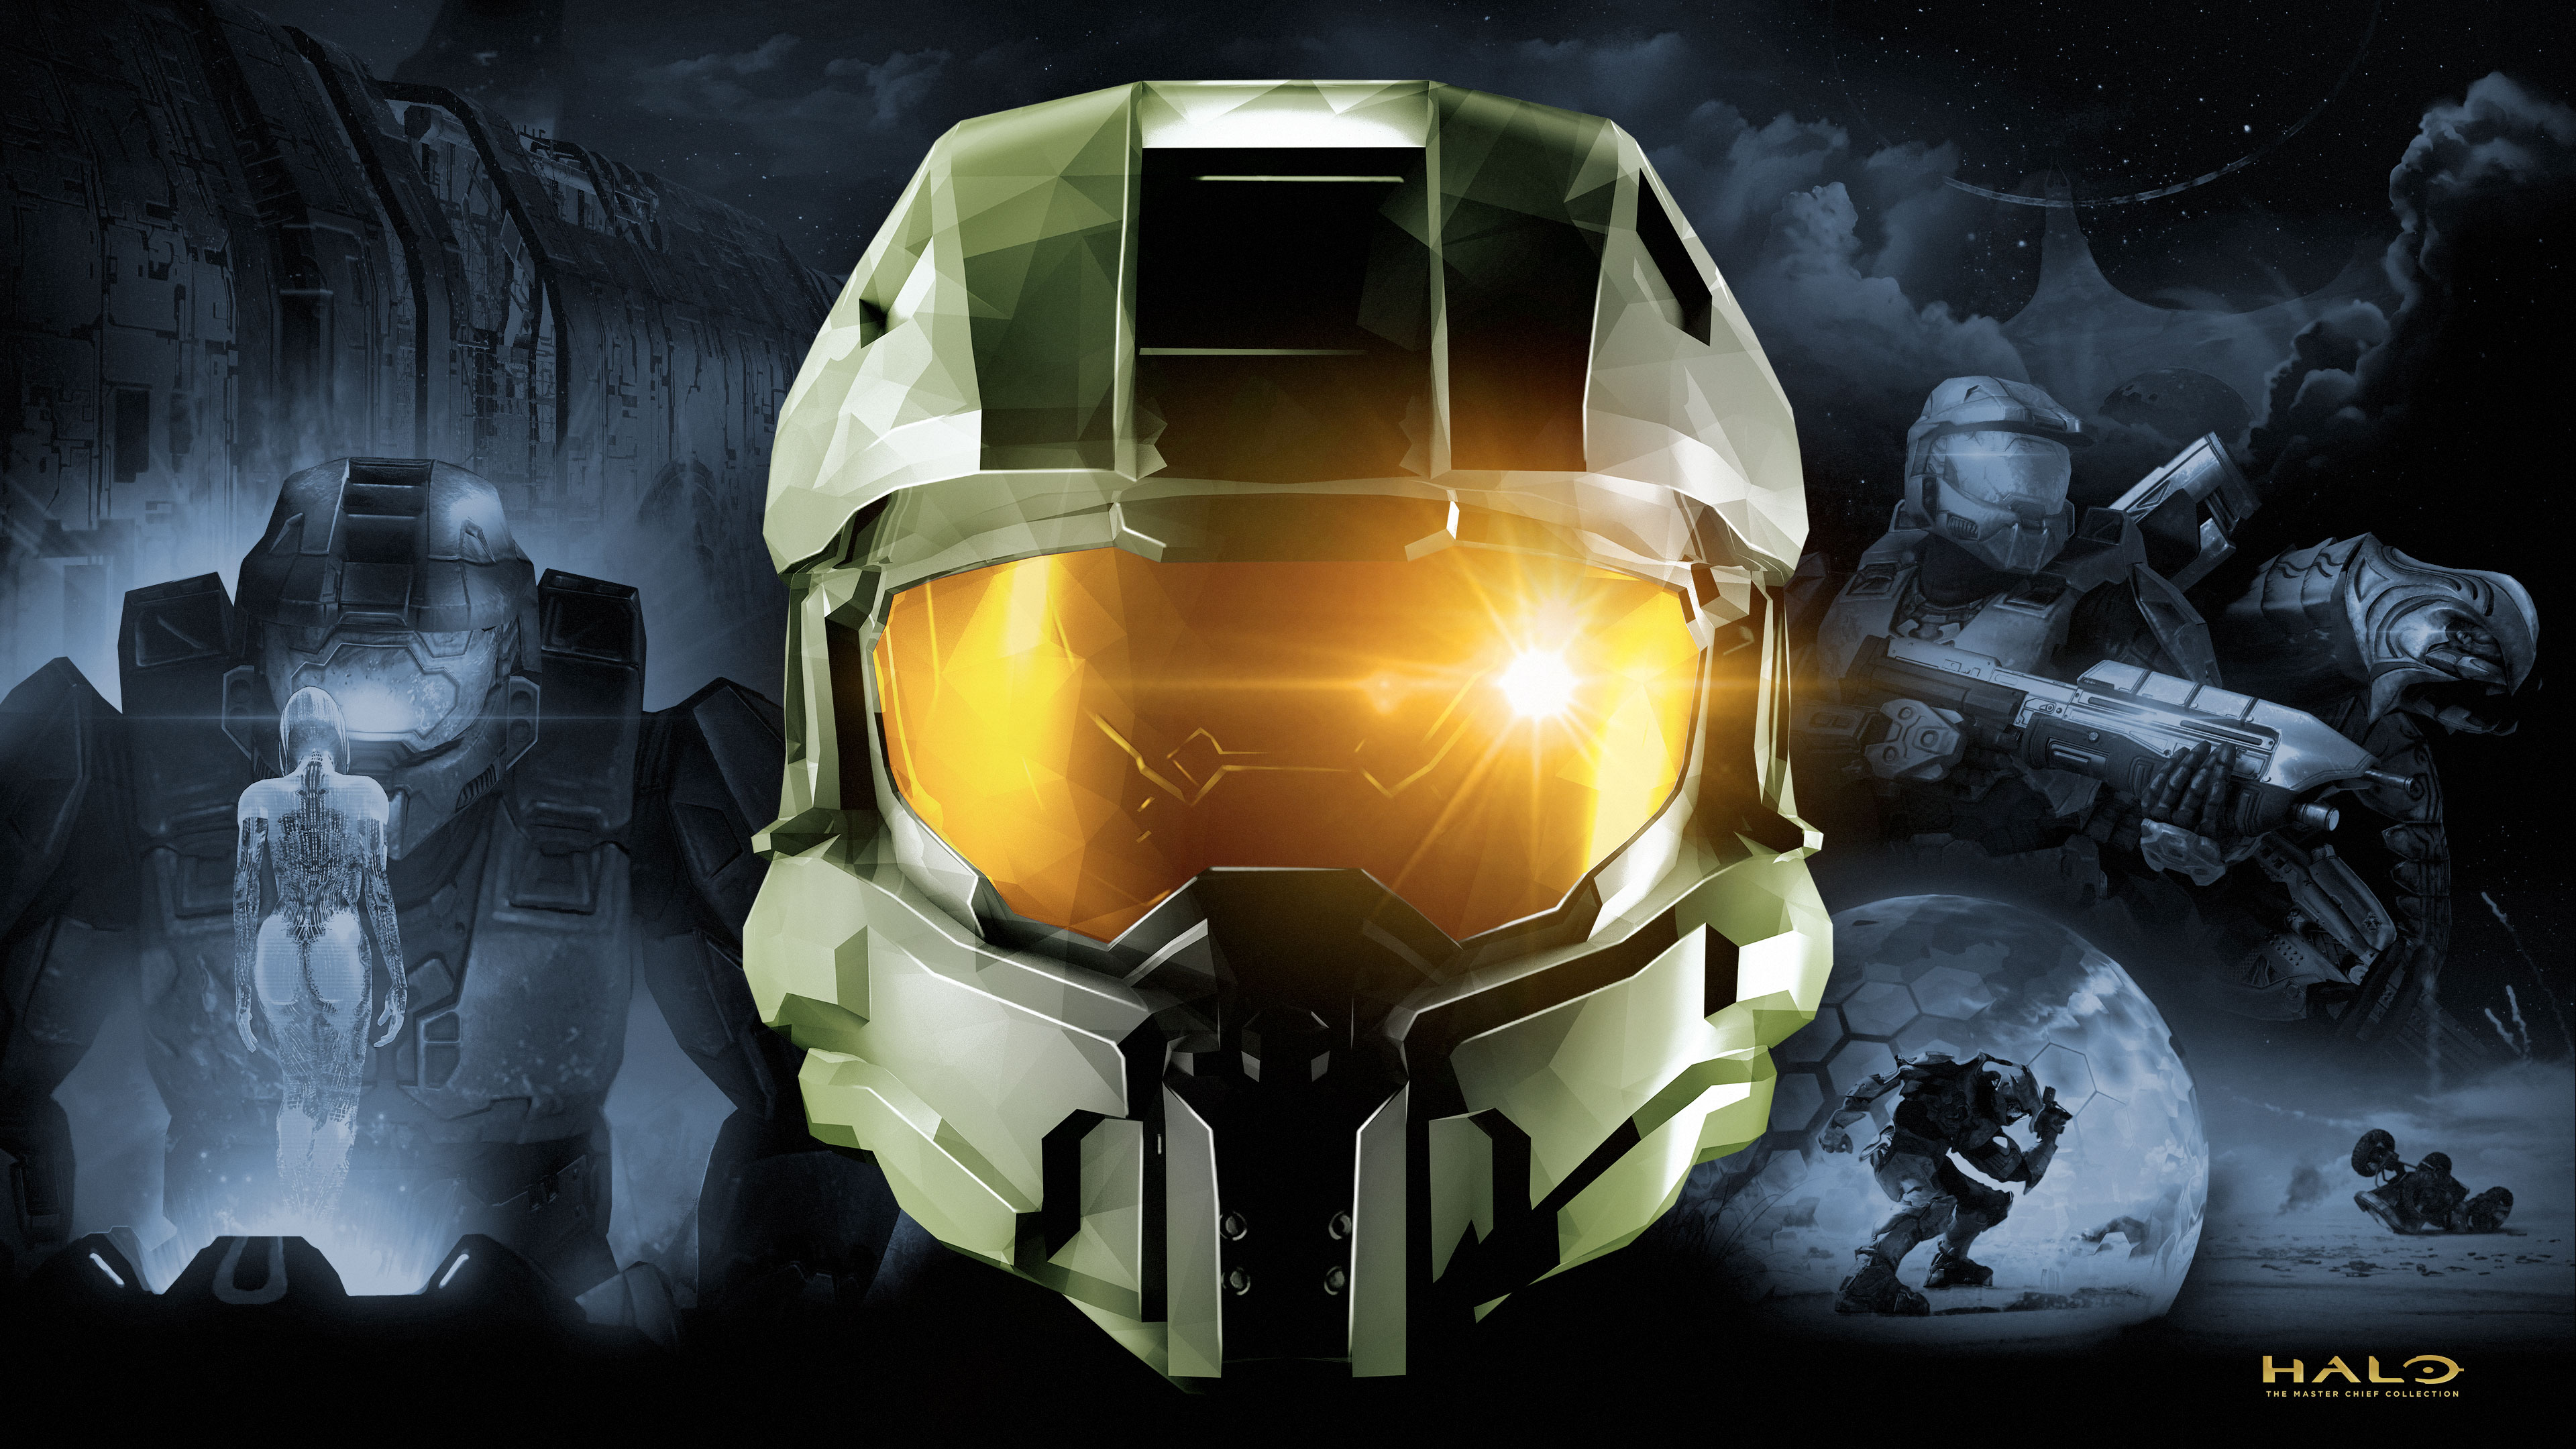 Halo: The Master Chief Collection 4K Wallpaper, Xbox One ...